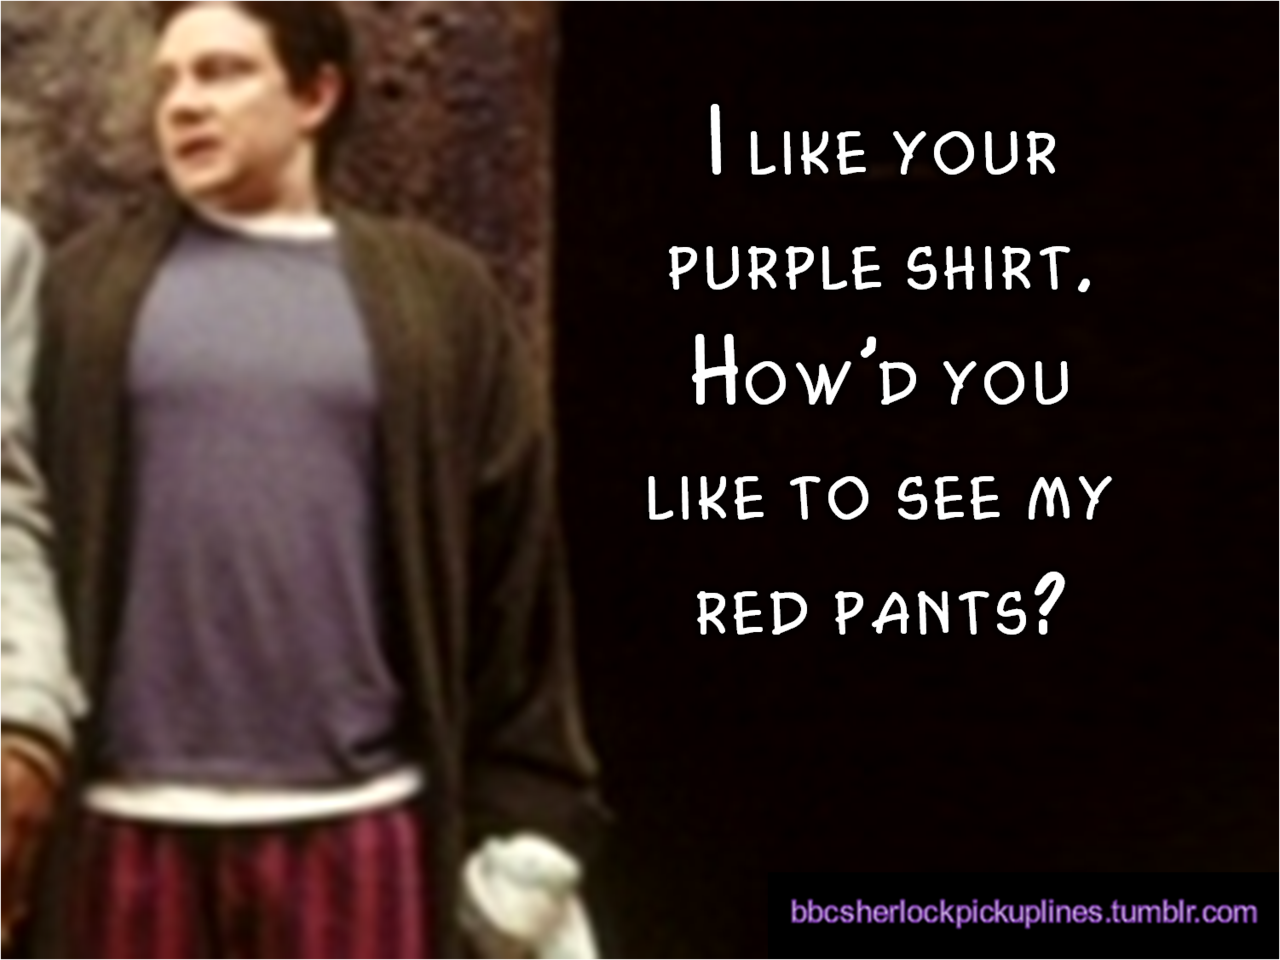 &ldquo;I like your purple shirt. How&rsquo;d you like to see my red pants?&rdquo;